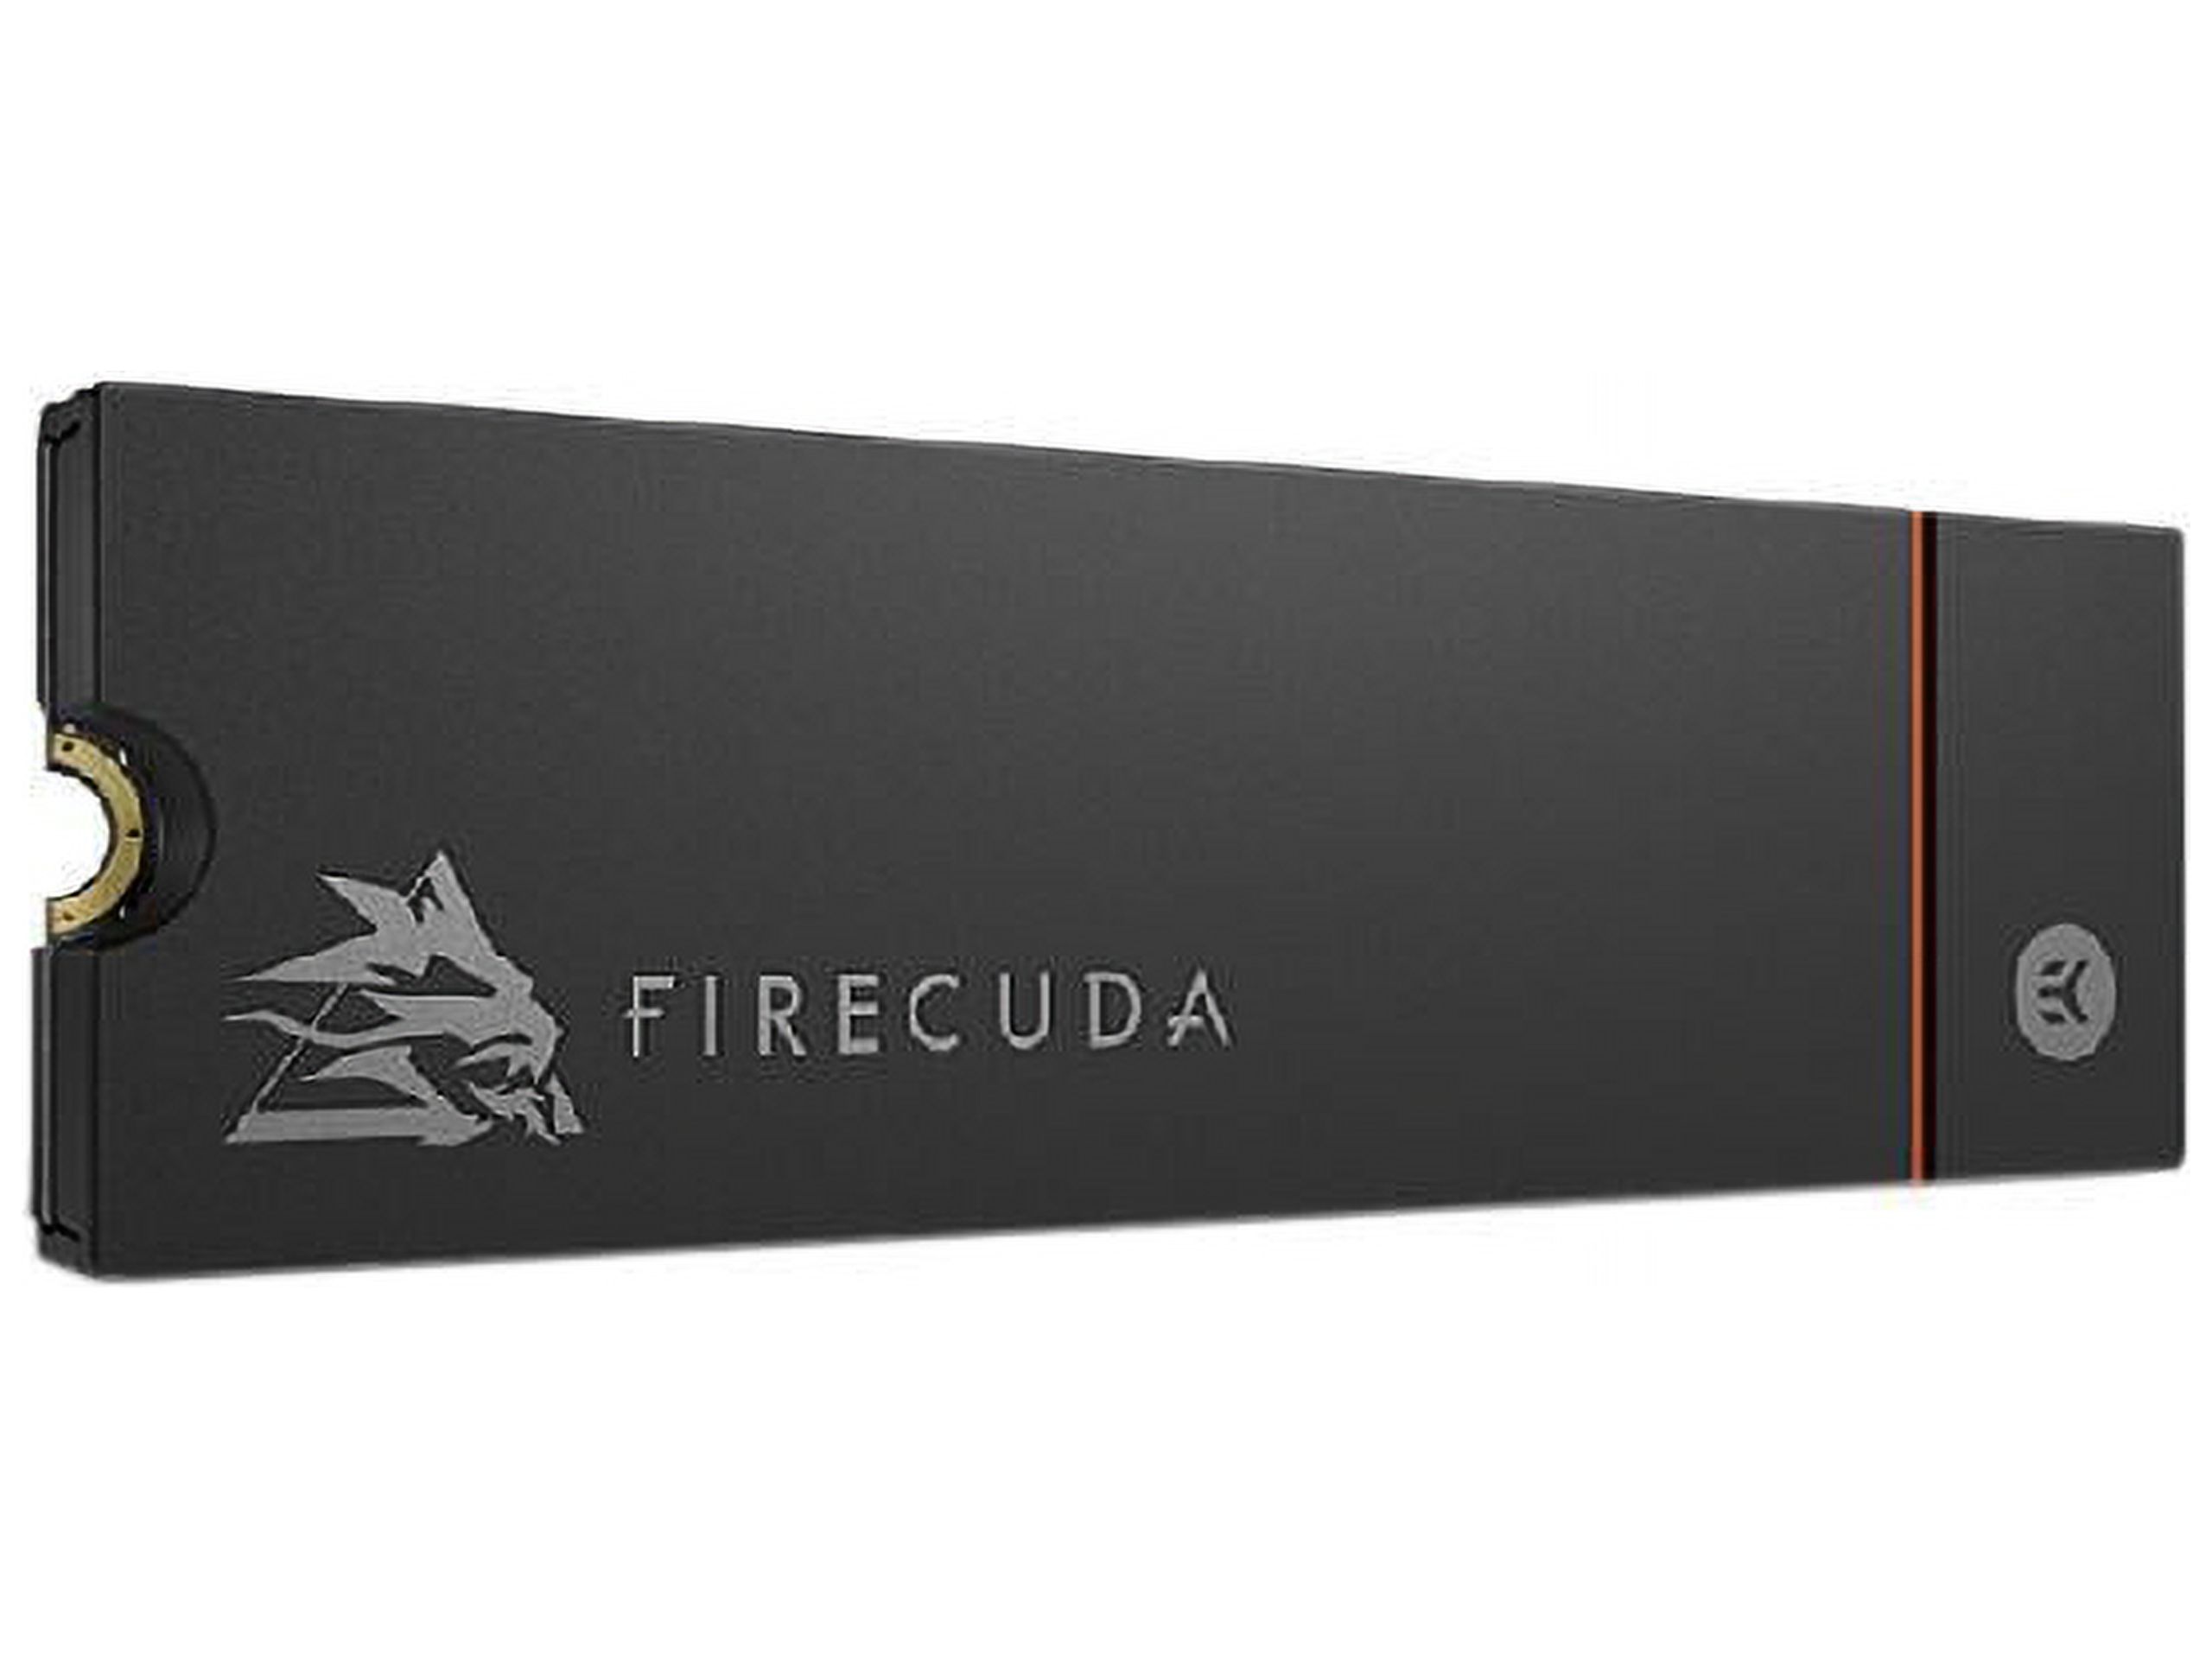 Seagate FireCuda 530 M.2 2280 4TB PCIe Gen4 x4 NVMe 1.4 3D NAND Internal Solid State Drive (SSD) ZP4000GM3A023 - image 2 of 5